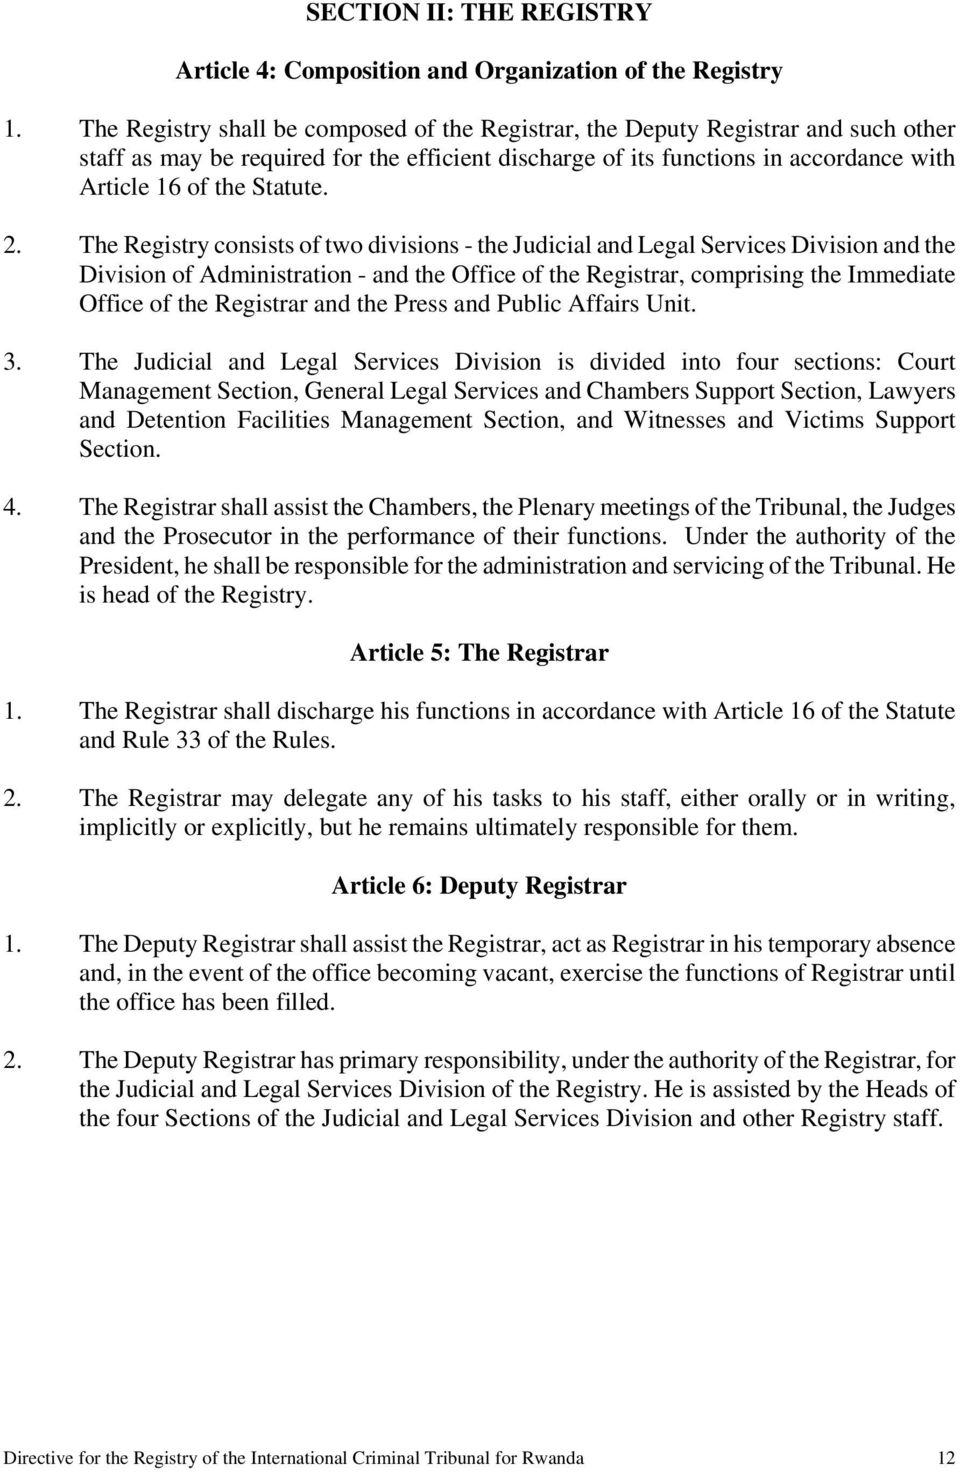 2. The Registry consists of two divisions - the Judicial and Legal Services Division and the Division of Administration - and the Office of the Registrar, comprising the Immediate Office of the